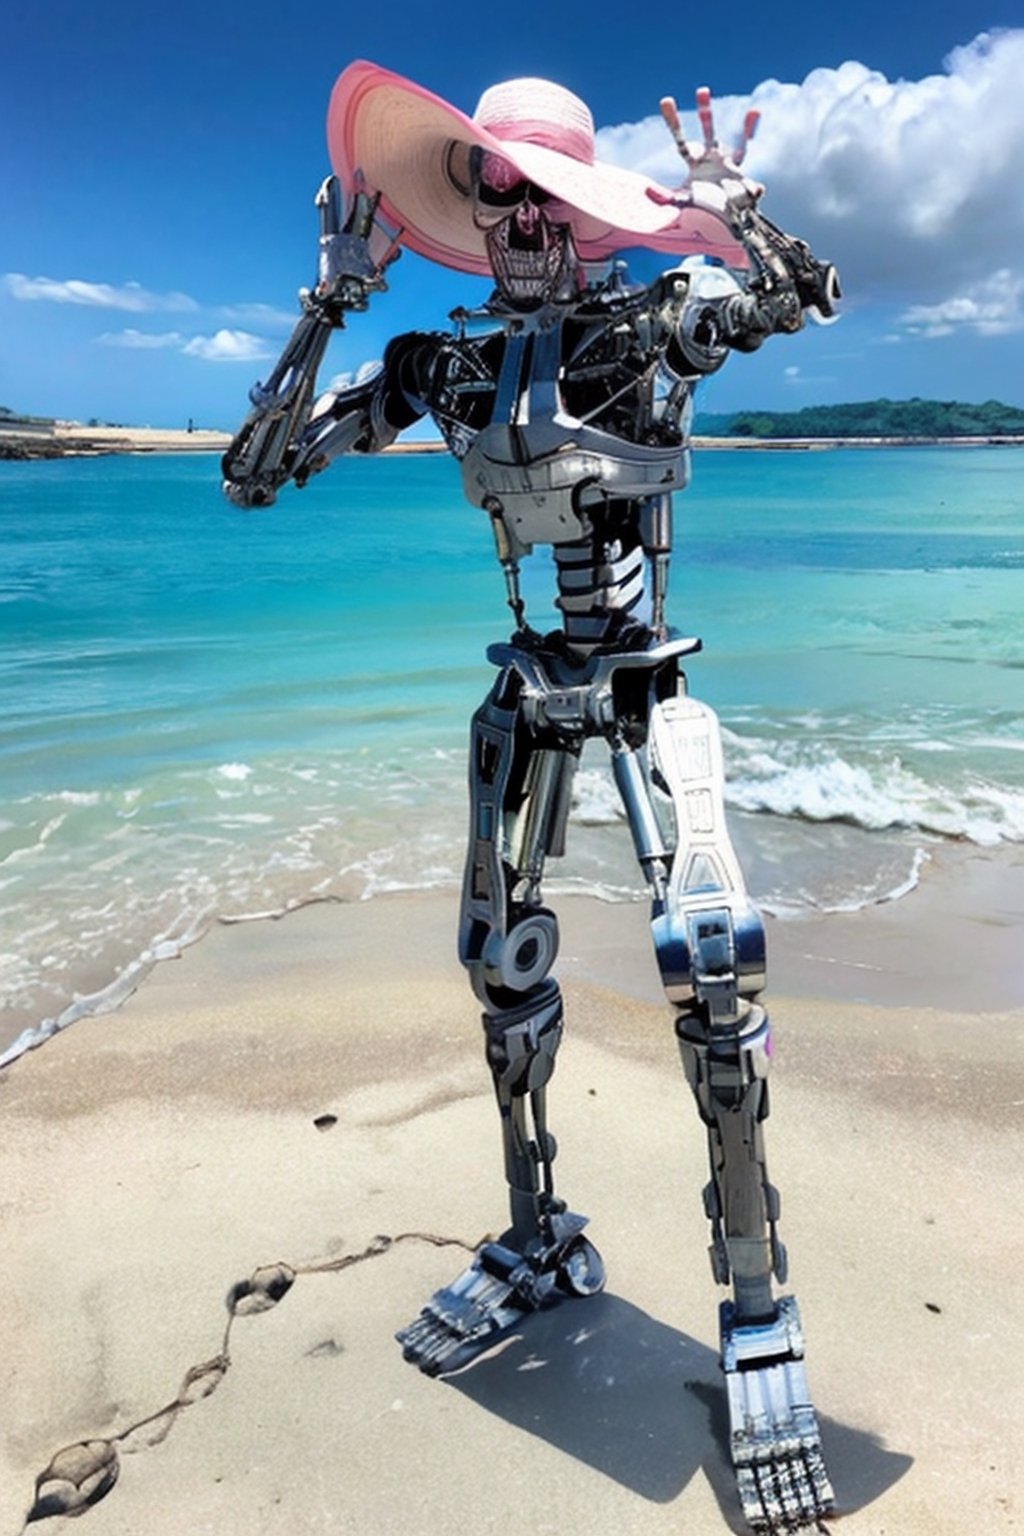 T800Endoskeleton, robot, ,skull face, chrome metal body, metal feet,  looking at camera, (wearing a large pink sunhat), sunglasses
standing, arm raised, waving, full body shot, 
outside, beach, blue sky, beautiful background,
hdr, extremely detailed, intense ambiance, lora:T800Endoskeleton:.8
